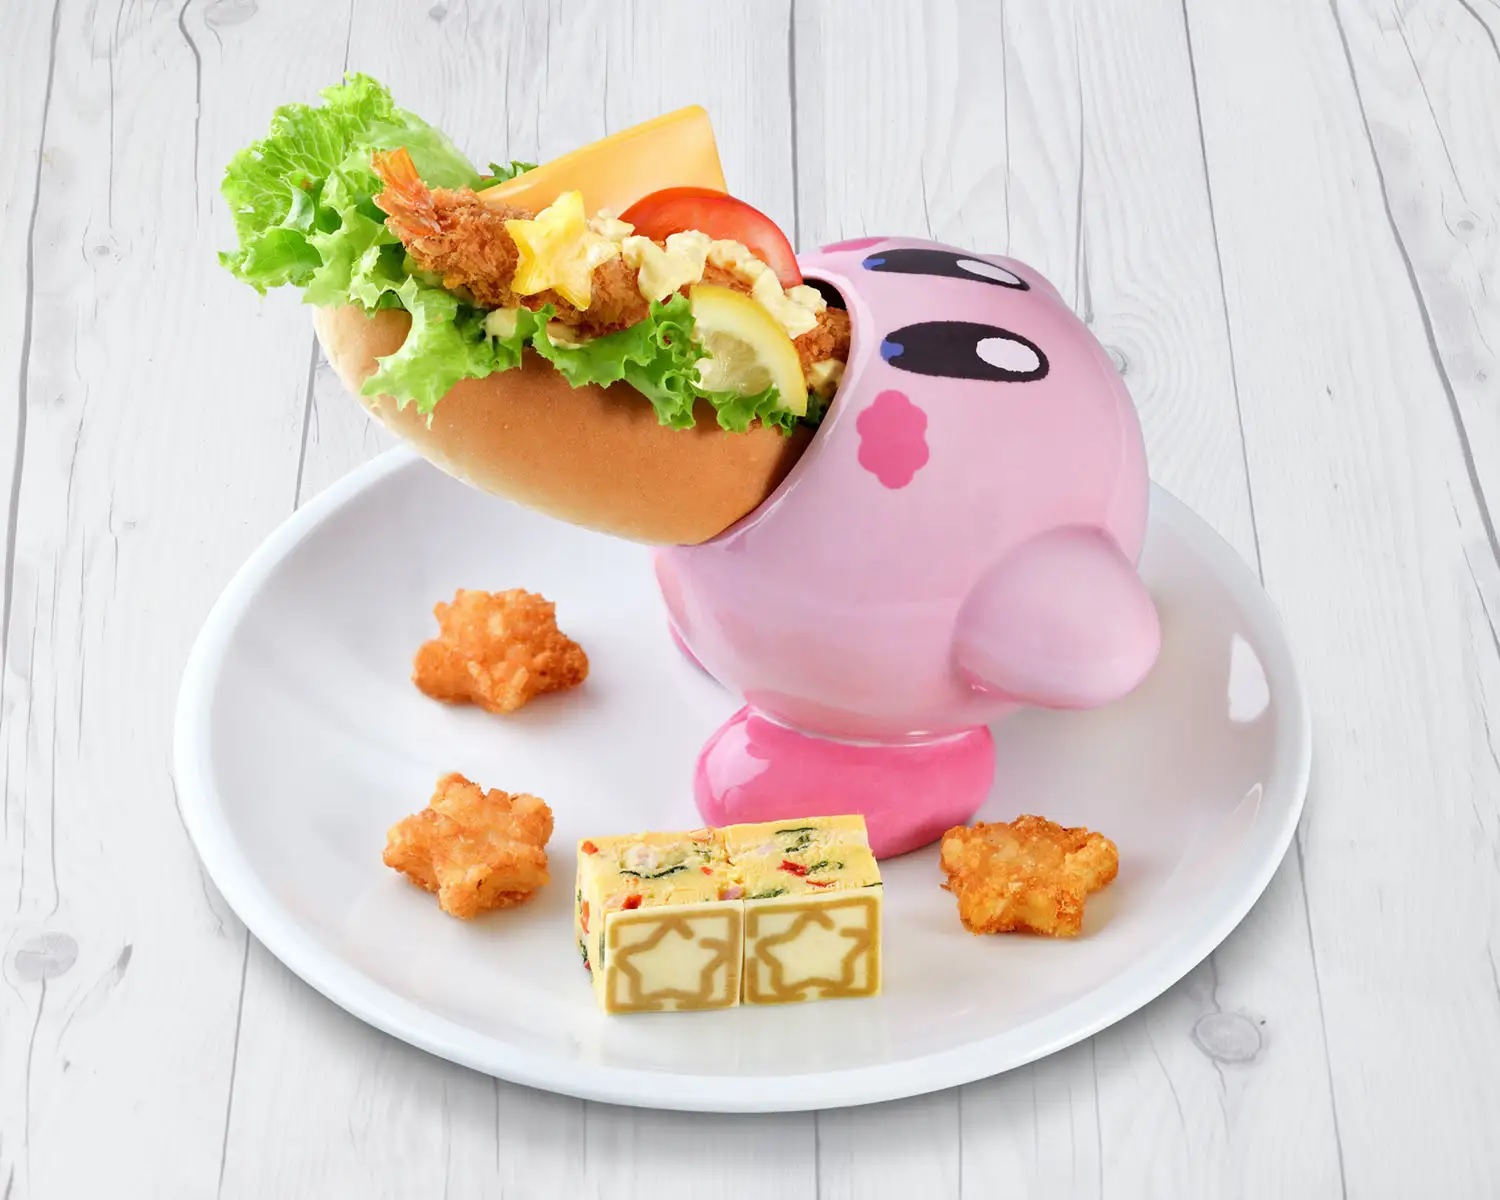 New Kirby Cafe coming to Japan’s most underappreciated foodie town with